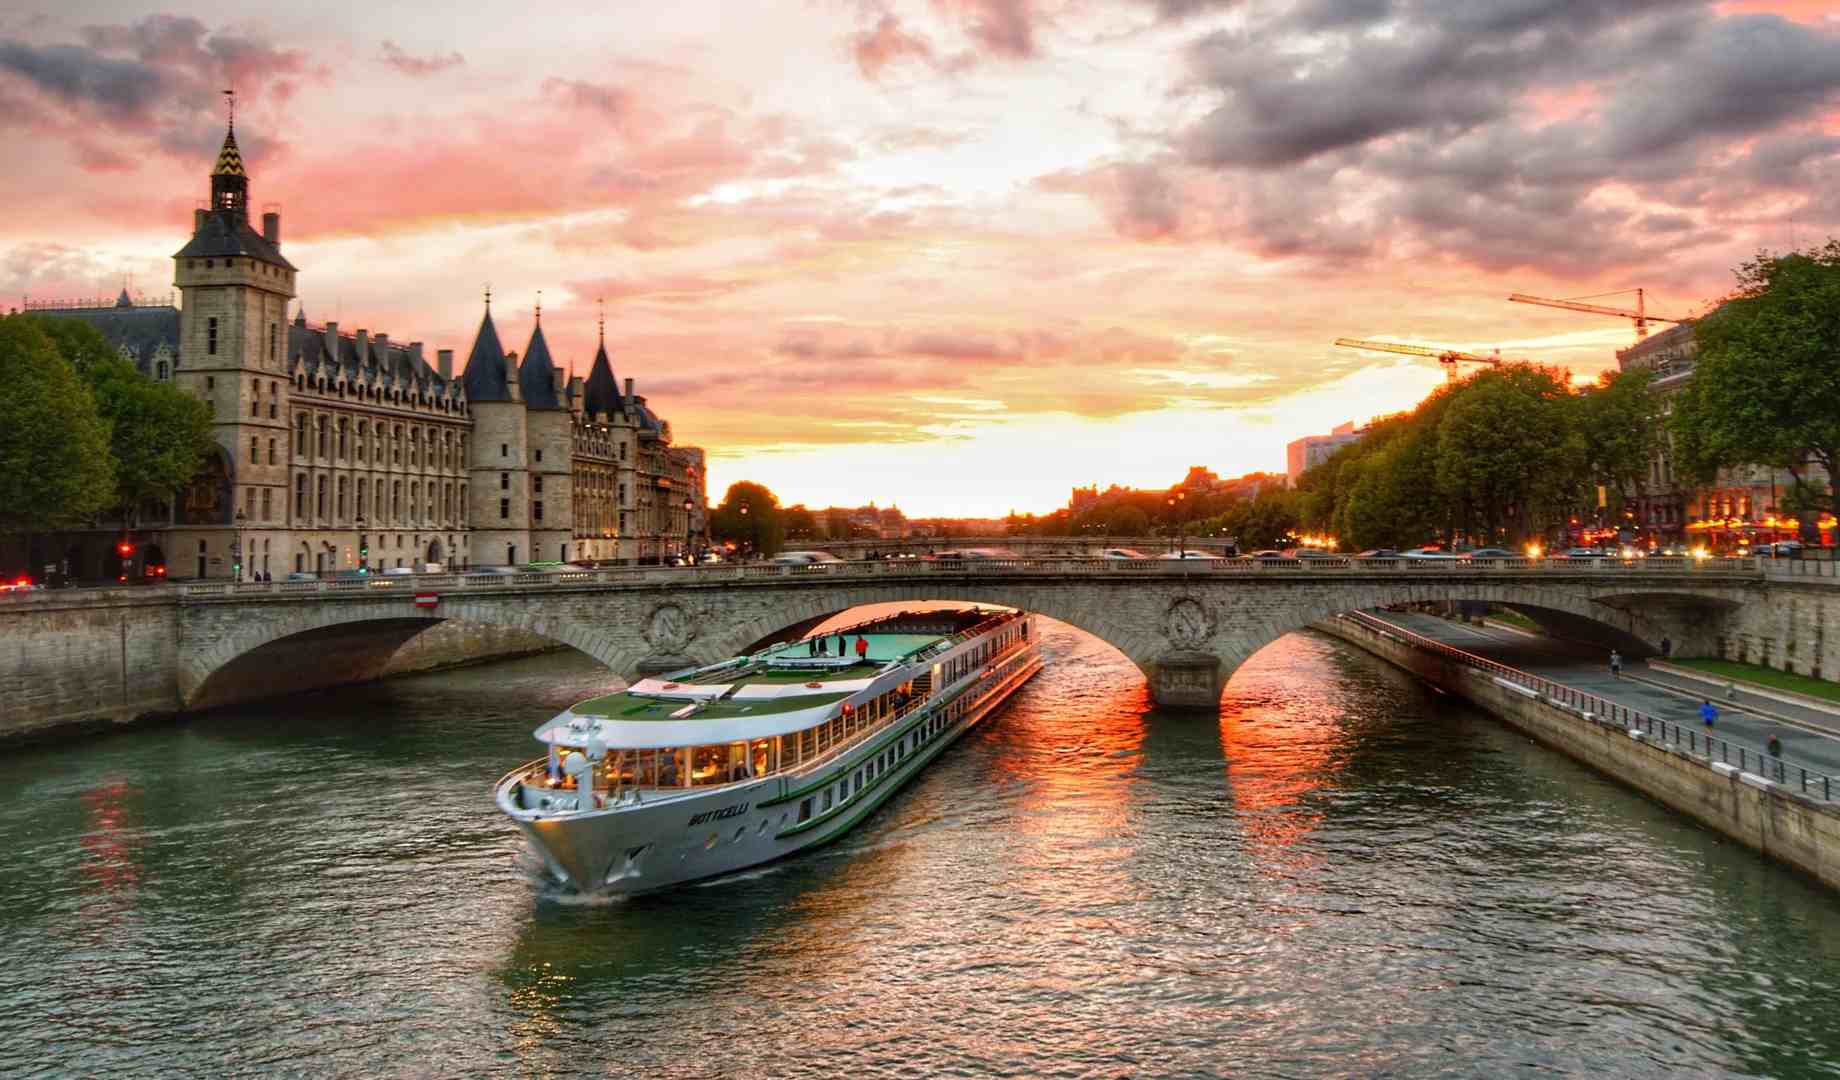 Romantic and Scenic: Seine River Tours and Things to Do on the Seine River